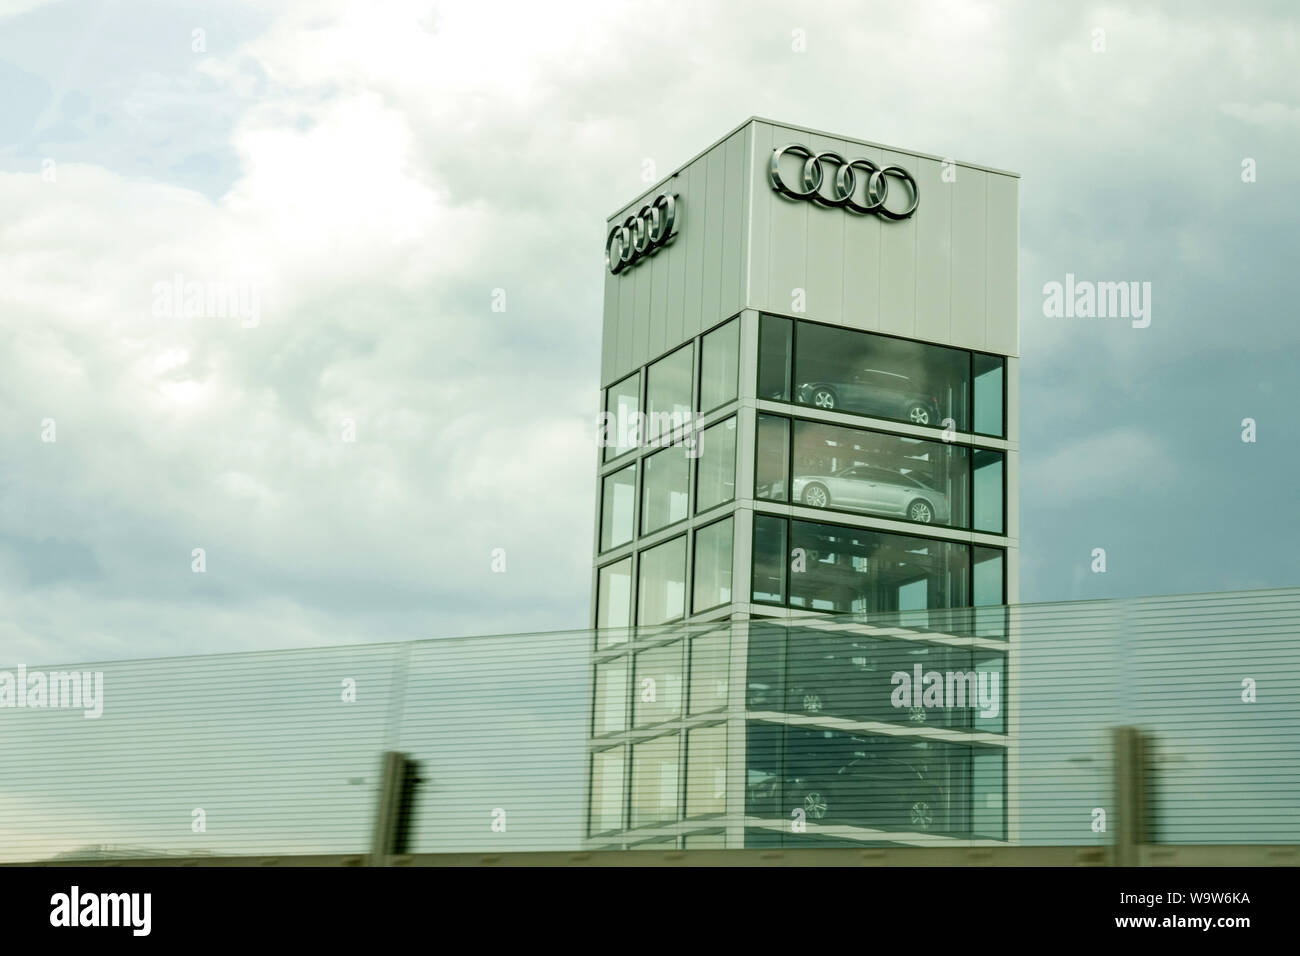 Audi logo, building and cars, Berlin Germany Stock Photo